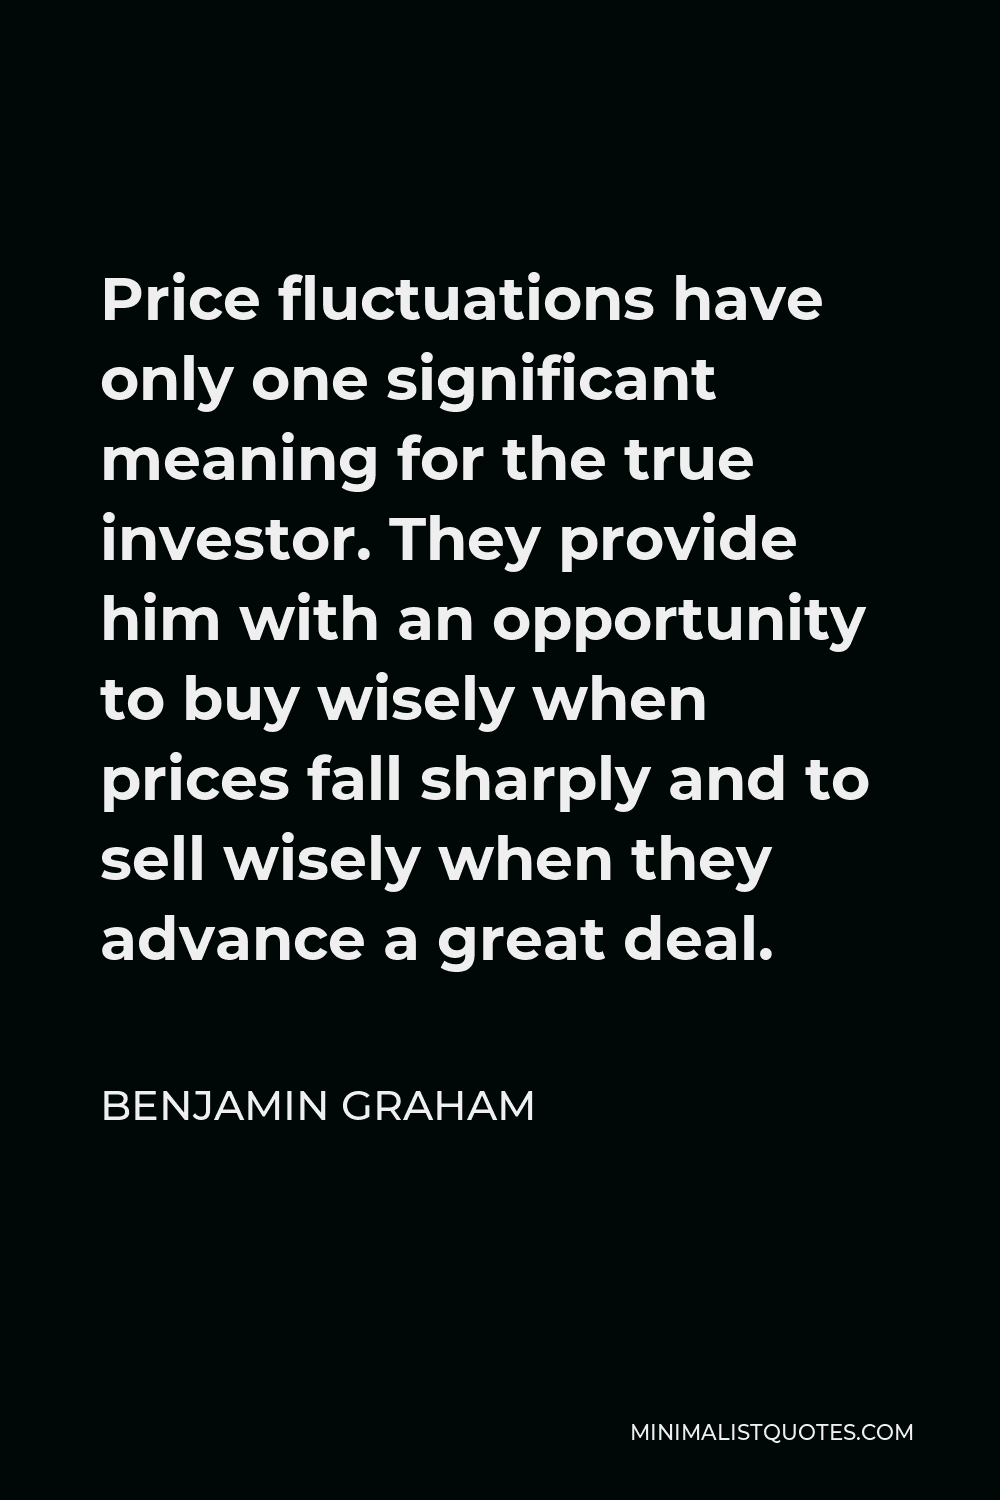 Benjamin Graham Quote - Price fluctuations have only one significant meaning for the true investor. They provide him with an opportunity to buy wisely when prices fall sharply and to sell wisely when they advance a great deal.